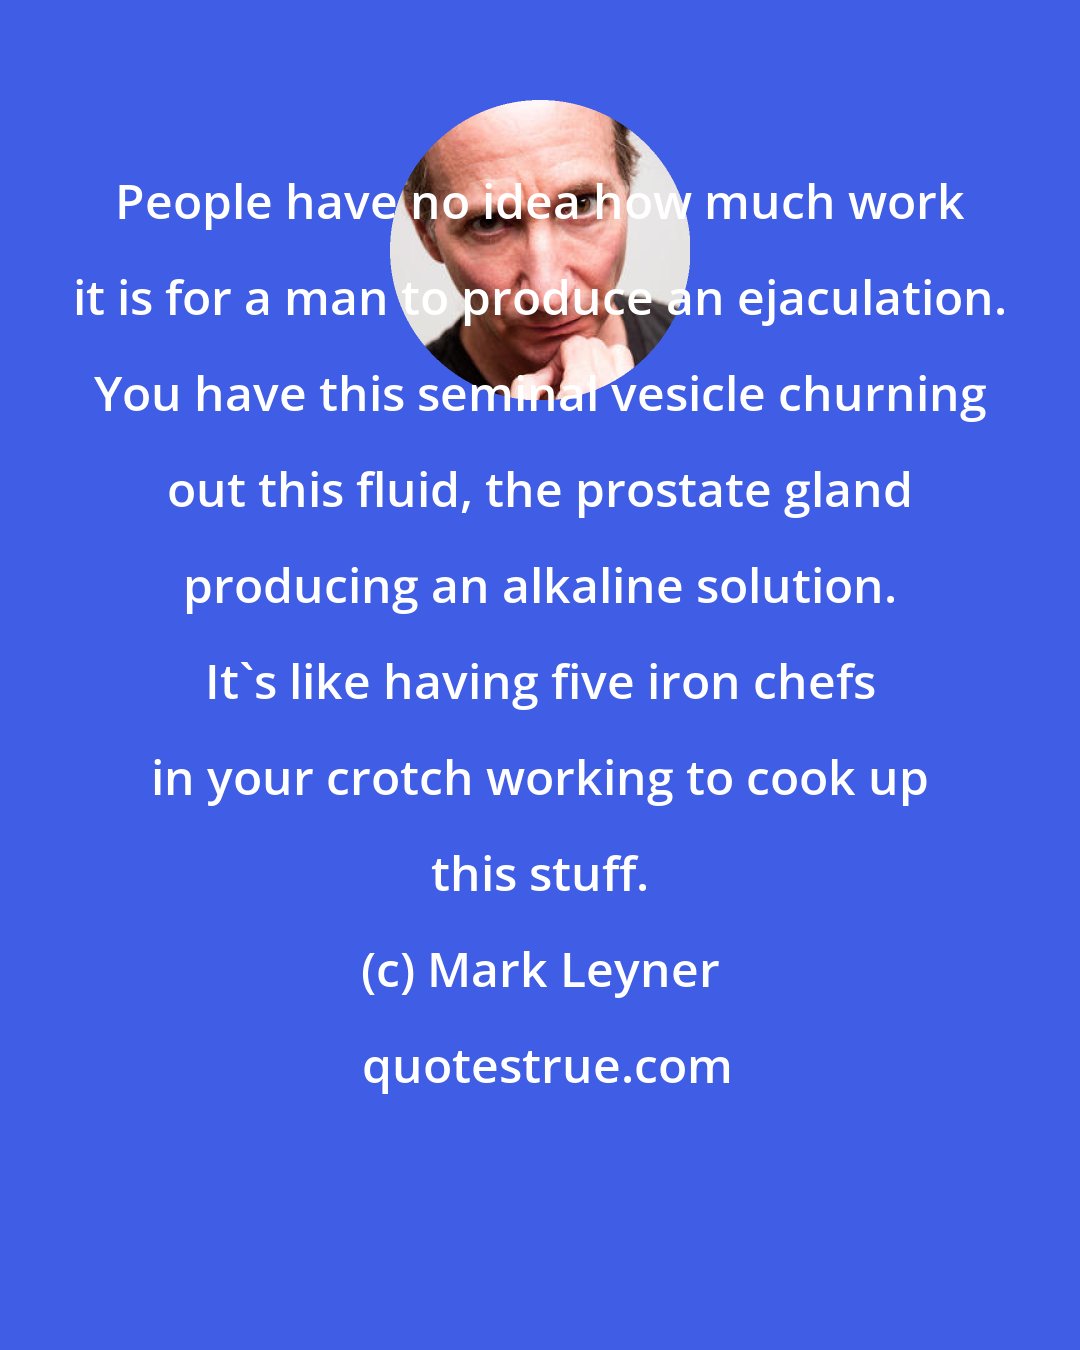 Mark Leyner: People have no idea how much work it is for a man to produce an ejaculation. You have this seminal vesicle churning out this fluid, the prostate gland producing an alkaline solution. It's like having five iron chefs in your crotch working to cook up this stuff.